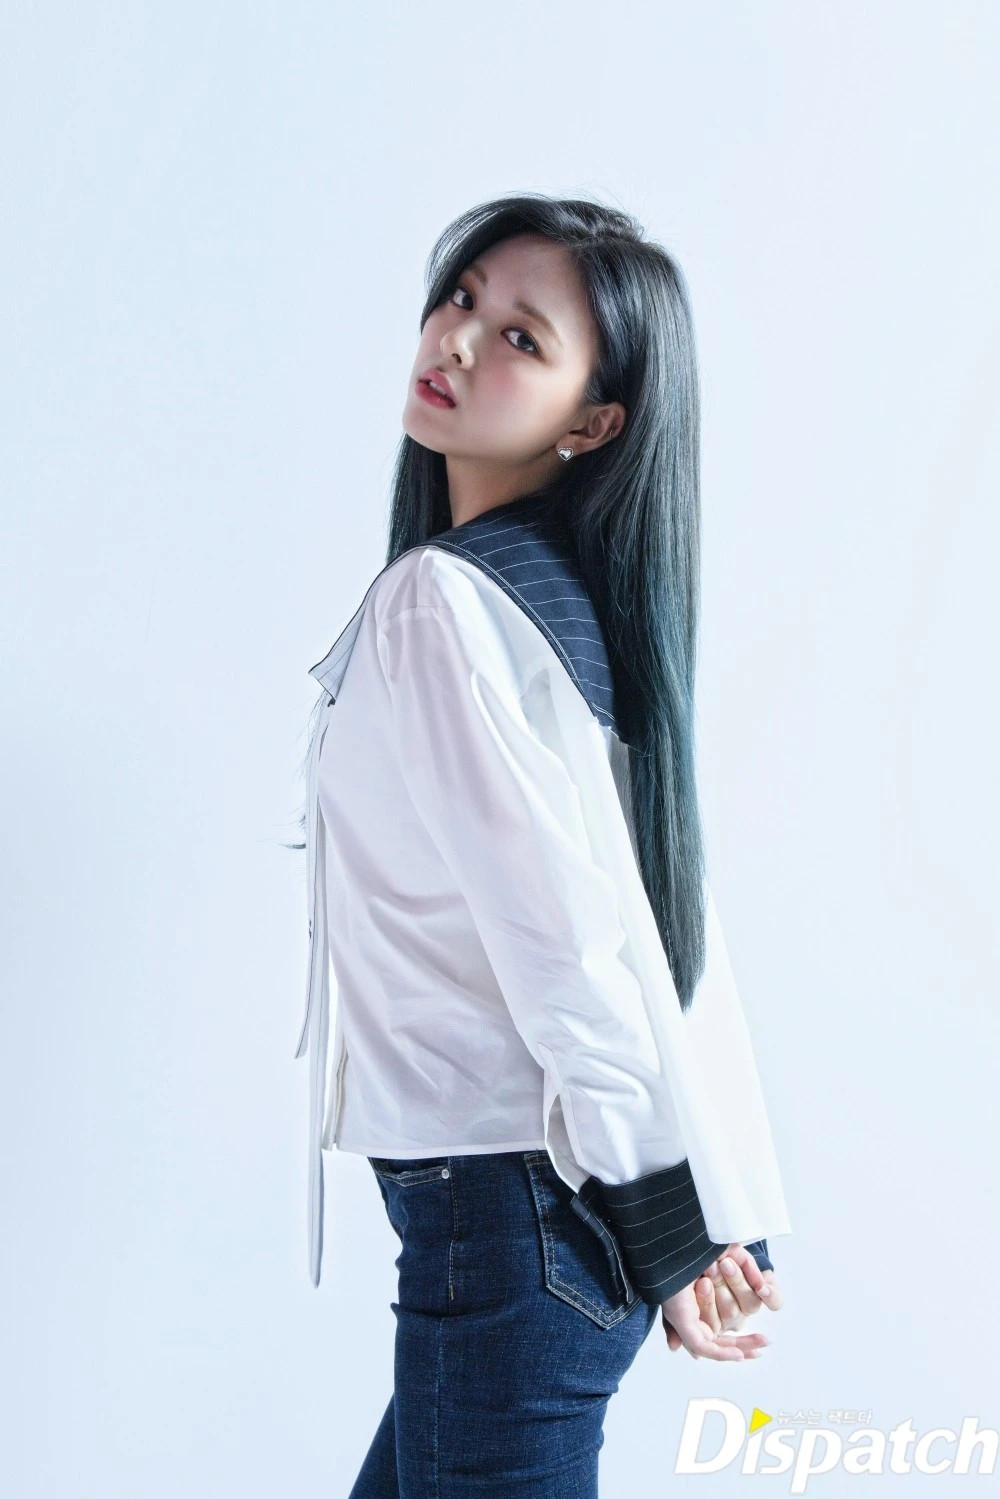 210427-ITZY-Yuna-GUESS-WHO-Promotion-Photoshoot-by-Dispatch-documents-1.jpeg